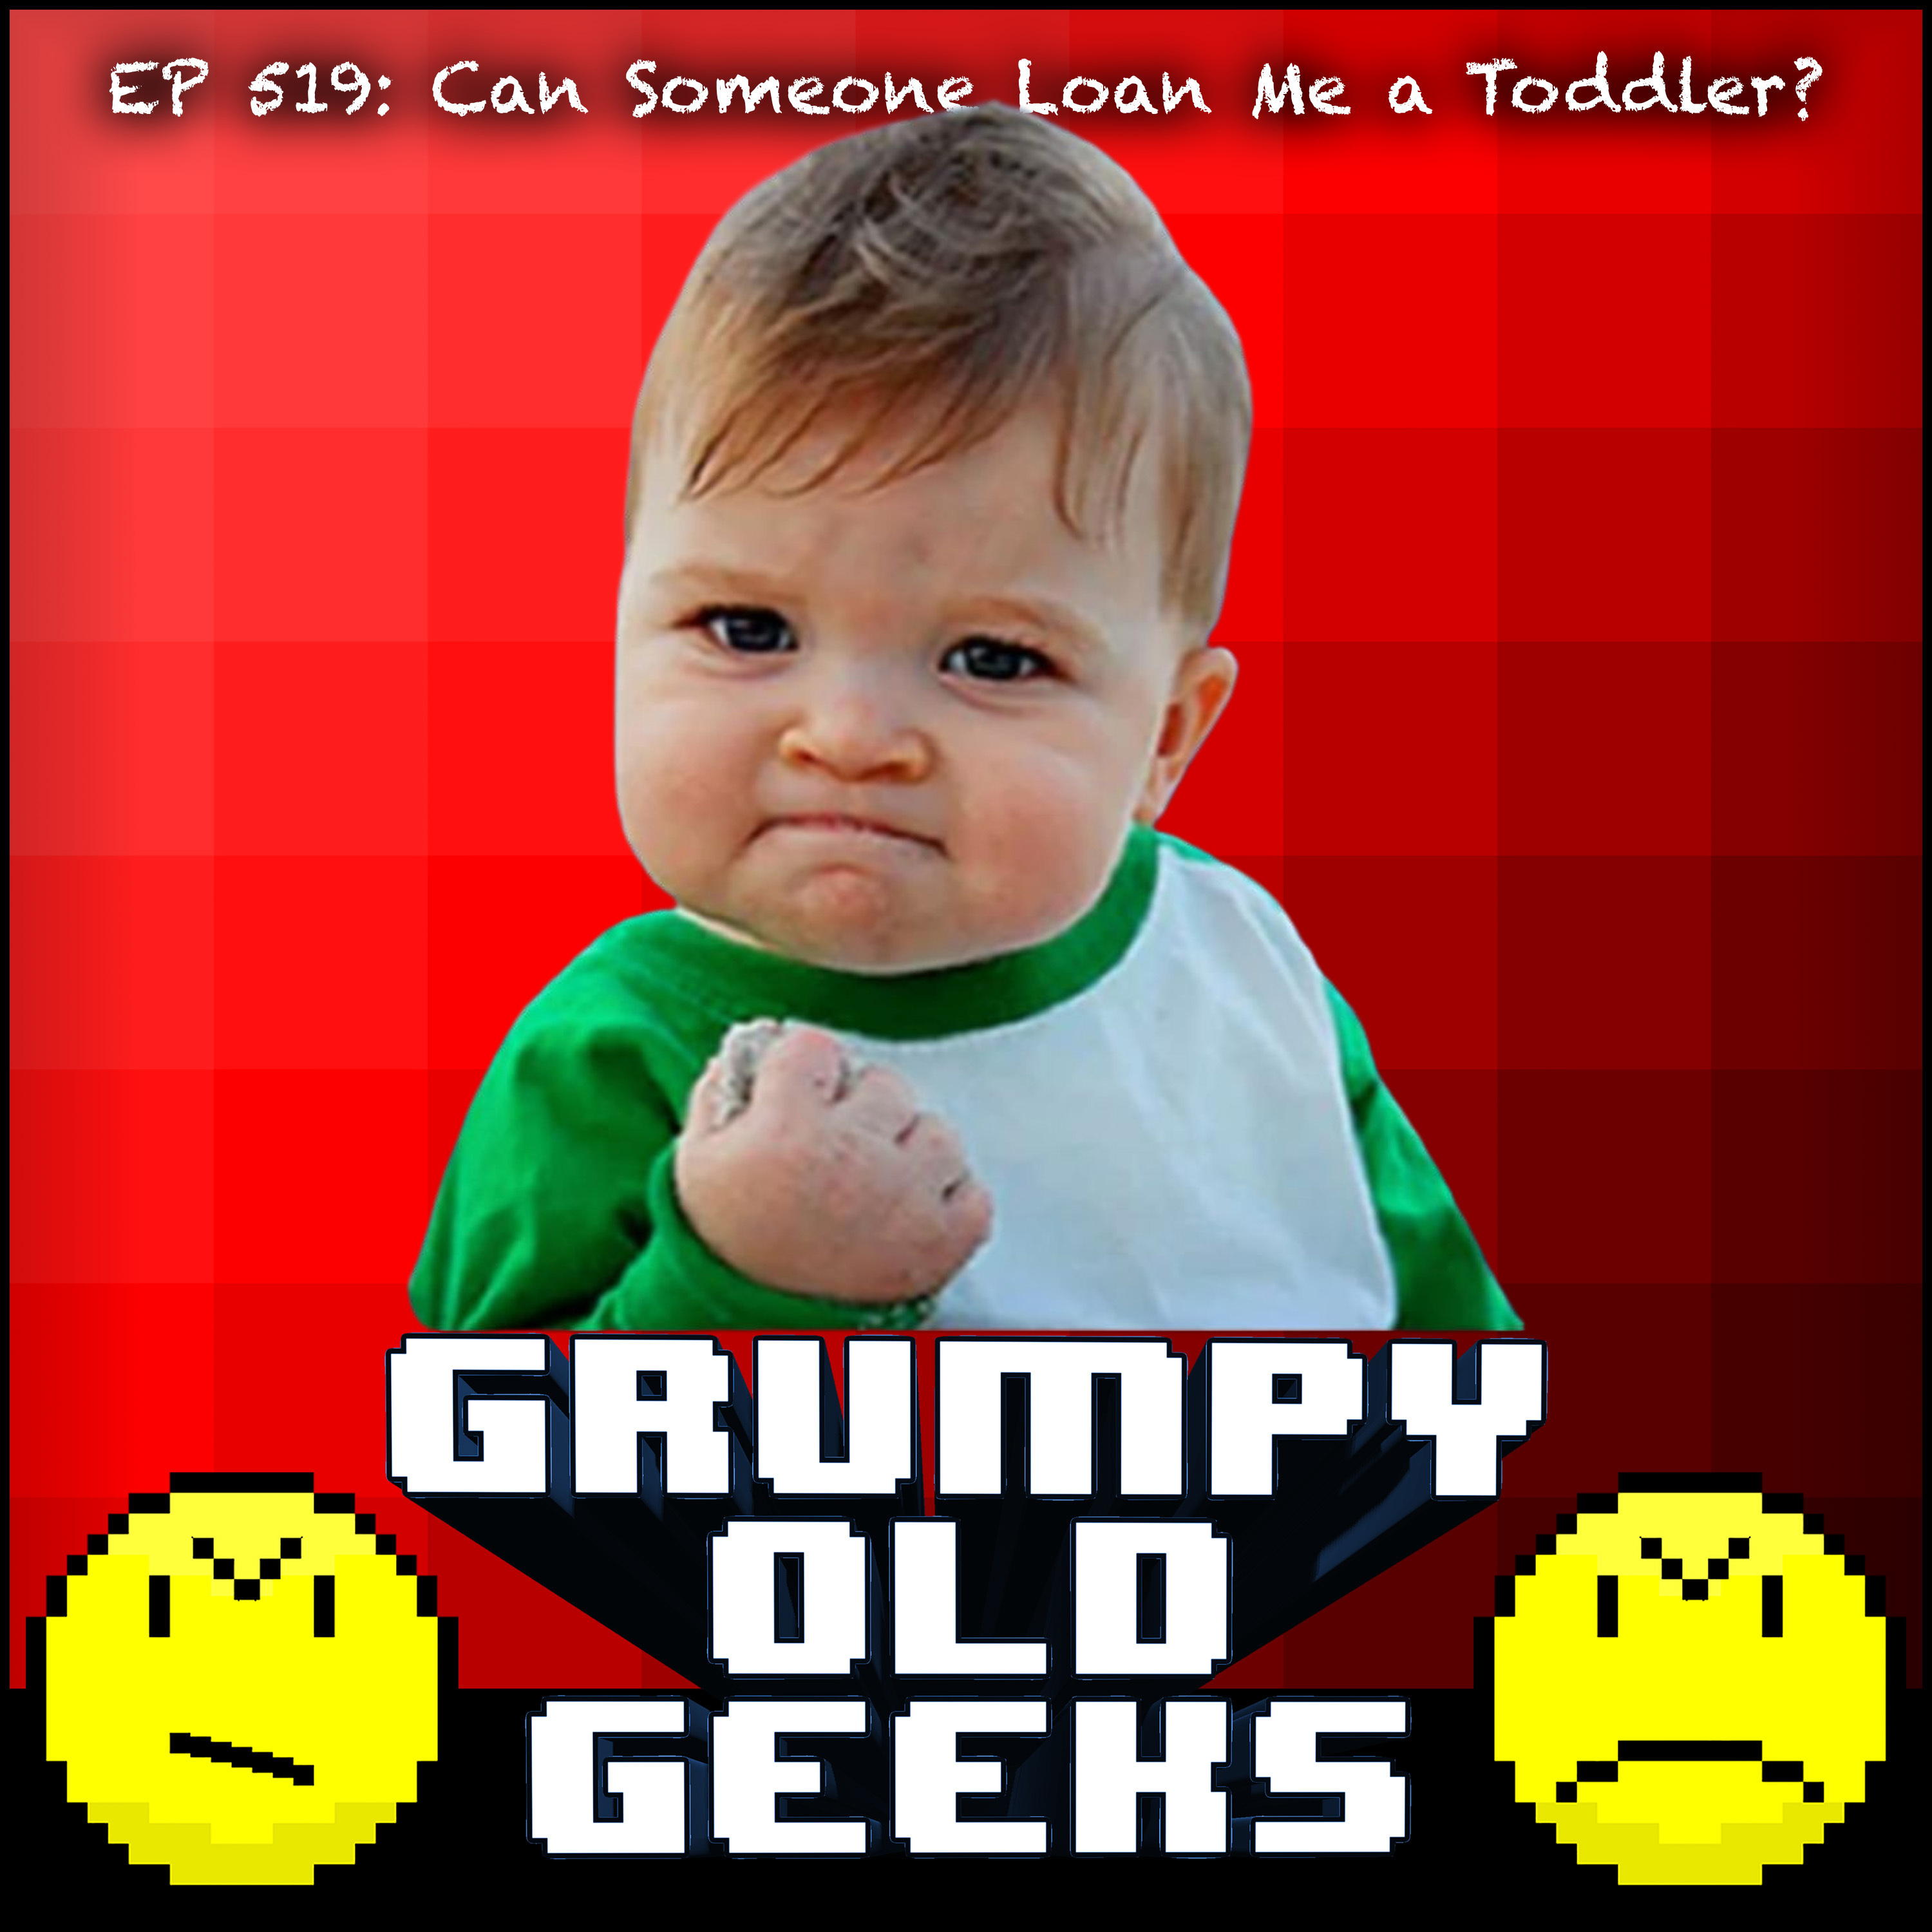 519: Can Someone Loan Me a Toddler? Image